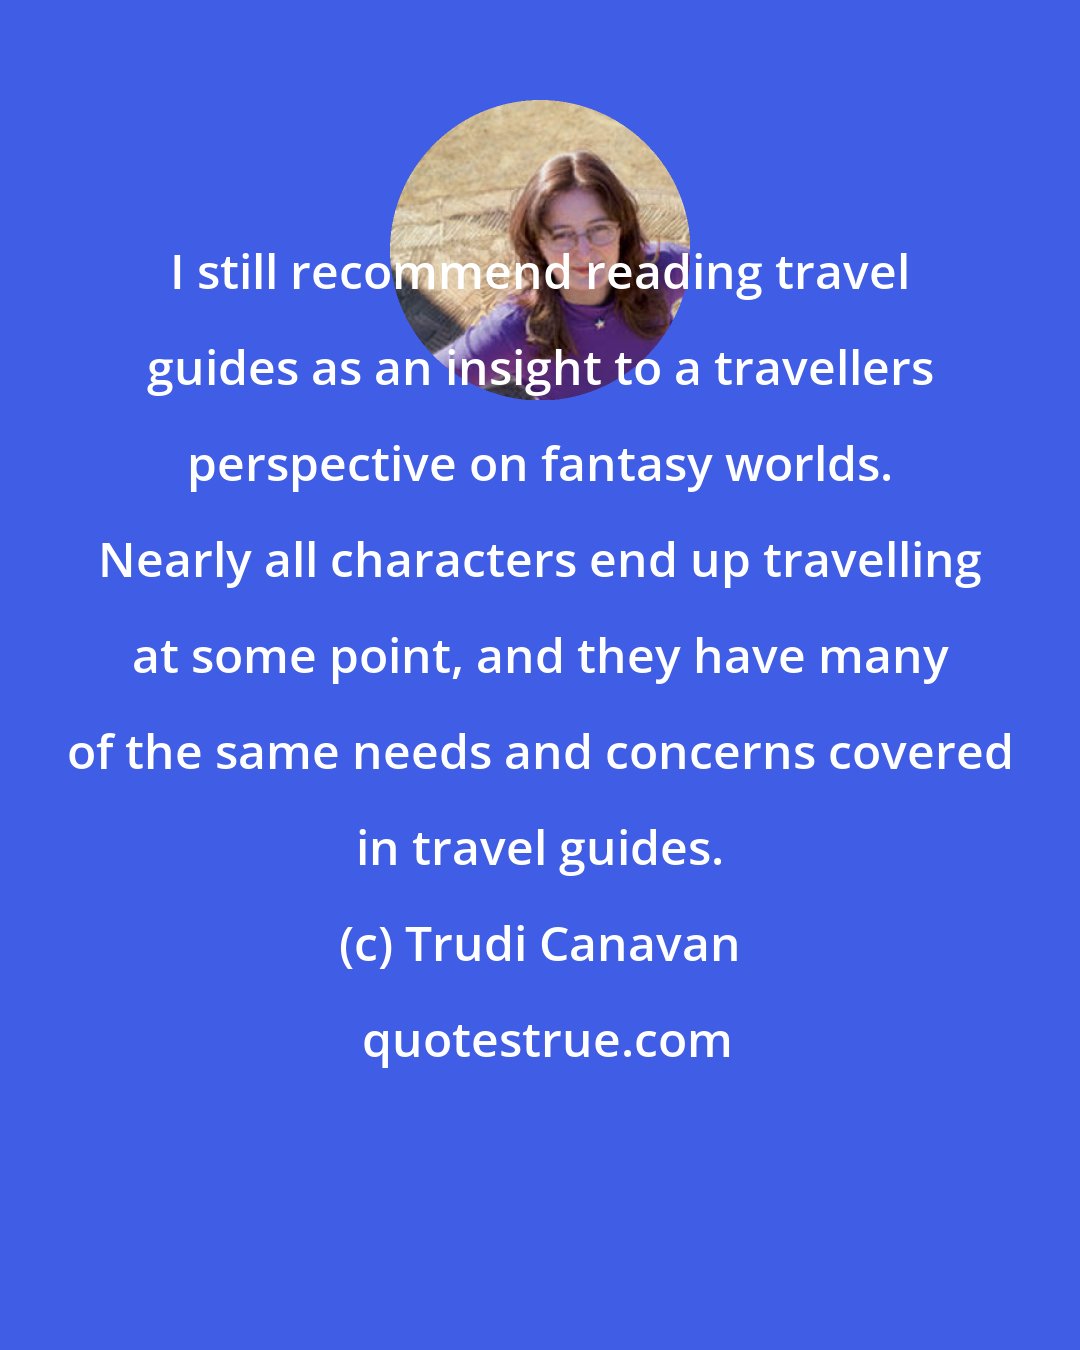 Trudi Canavan: I still recommend reading travel guides as an insight to a travellers perspective on fantasy worlds. Nearly all characters end up travelling at some point, and they have many of the same needs and concerns covered in travel guides.